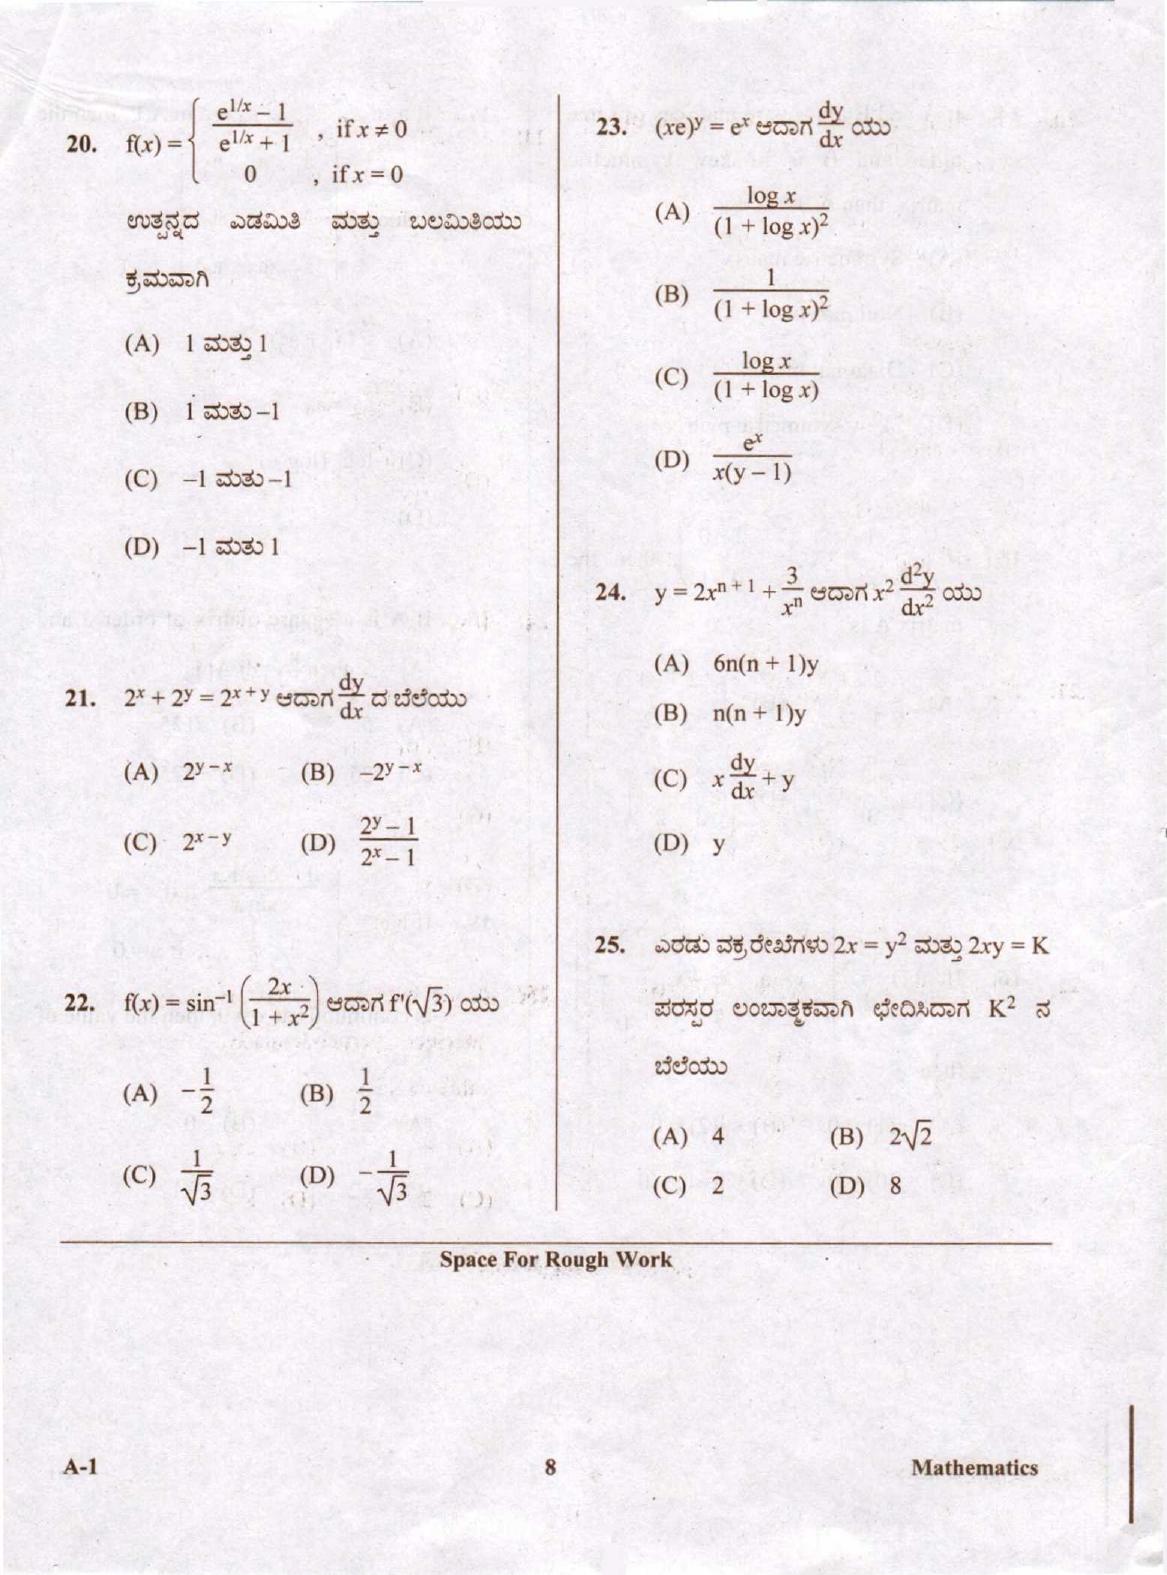 KCET Mathematics 2020 Question Papers - Page 8